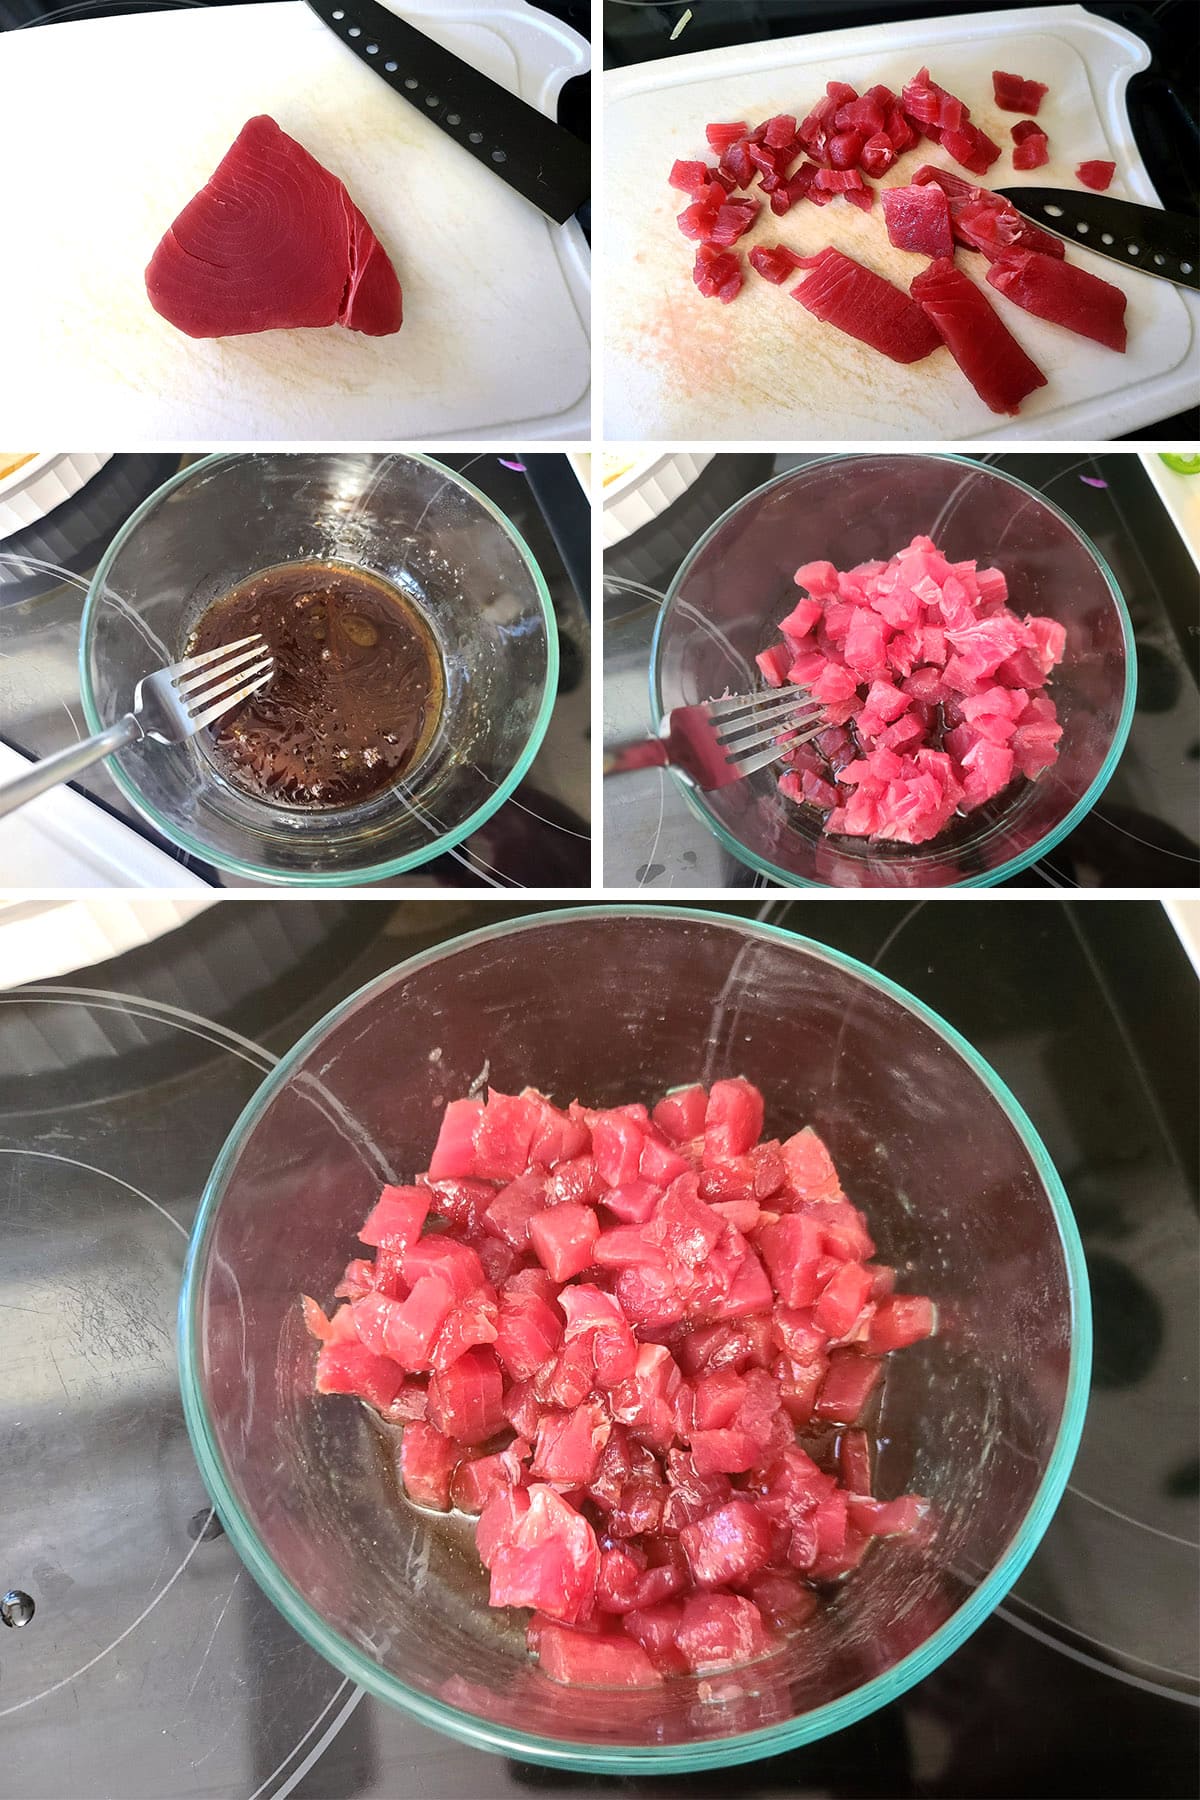 A 5 part image showing the tuna being cut, the marinade being mixed, and the chopped tuna being stirred into the marinade.